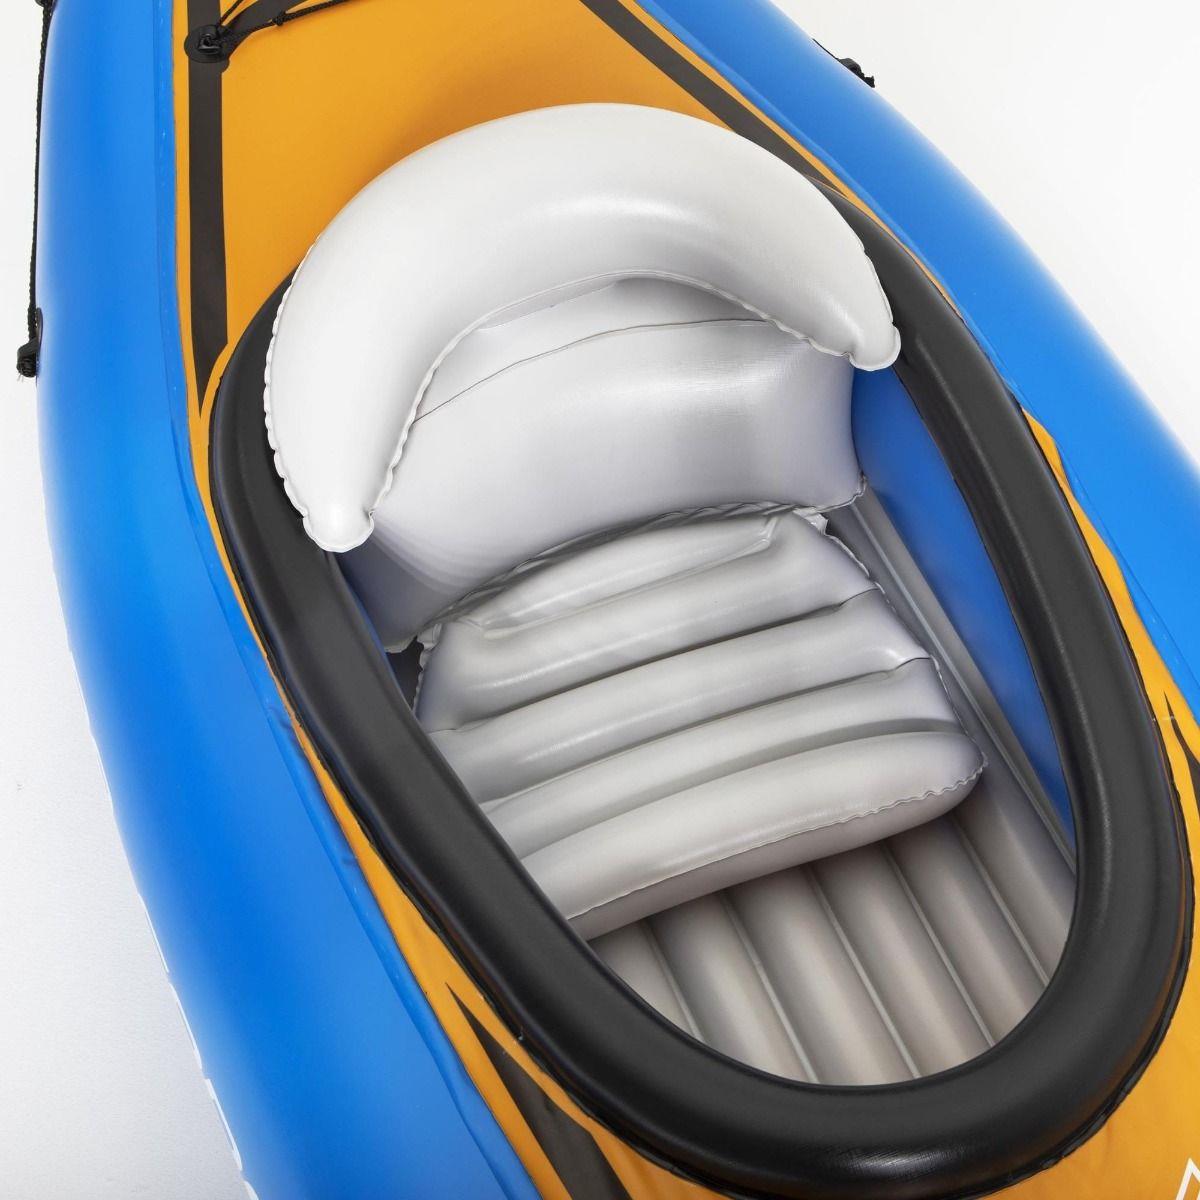 Upgraded Cove Champion Inflatable Kayak with Sports Paddle Canoe Boat Single